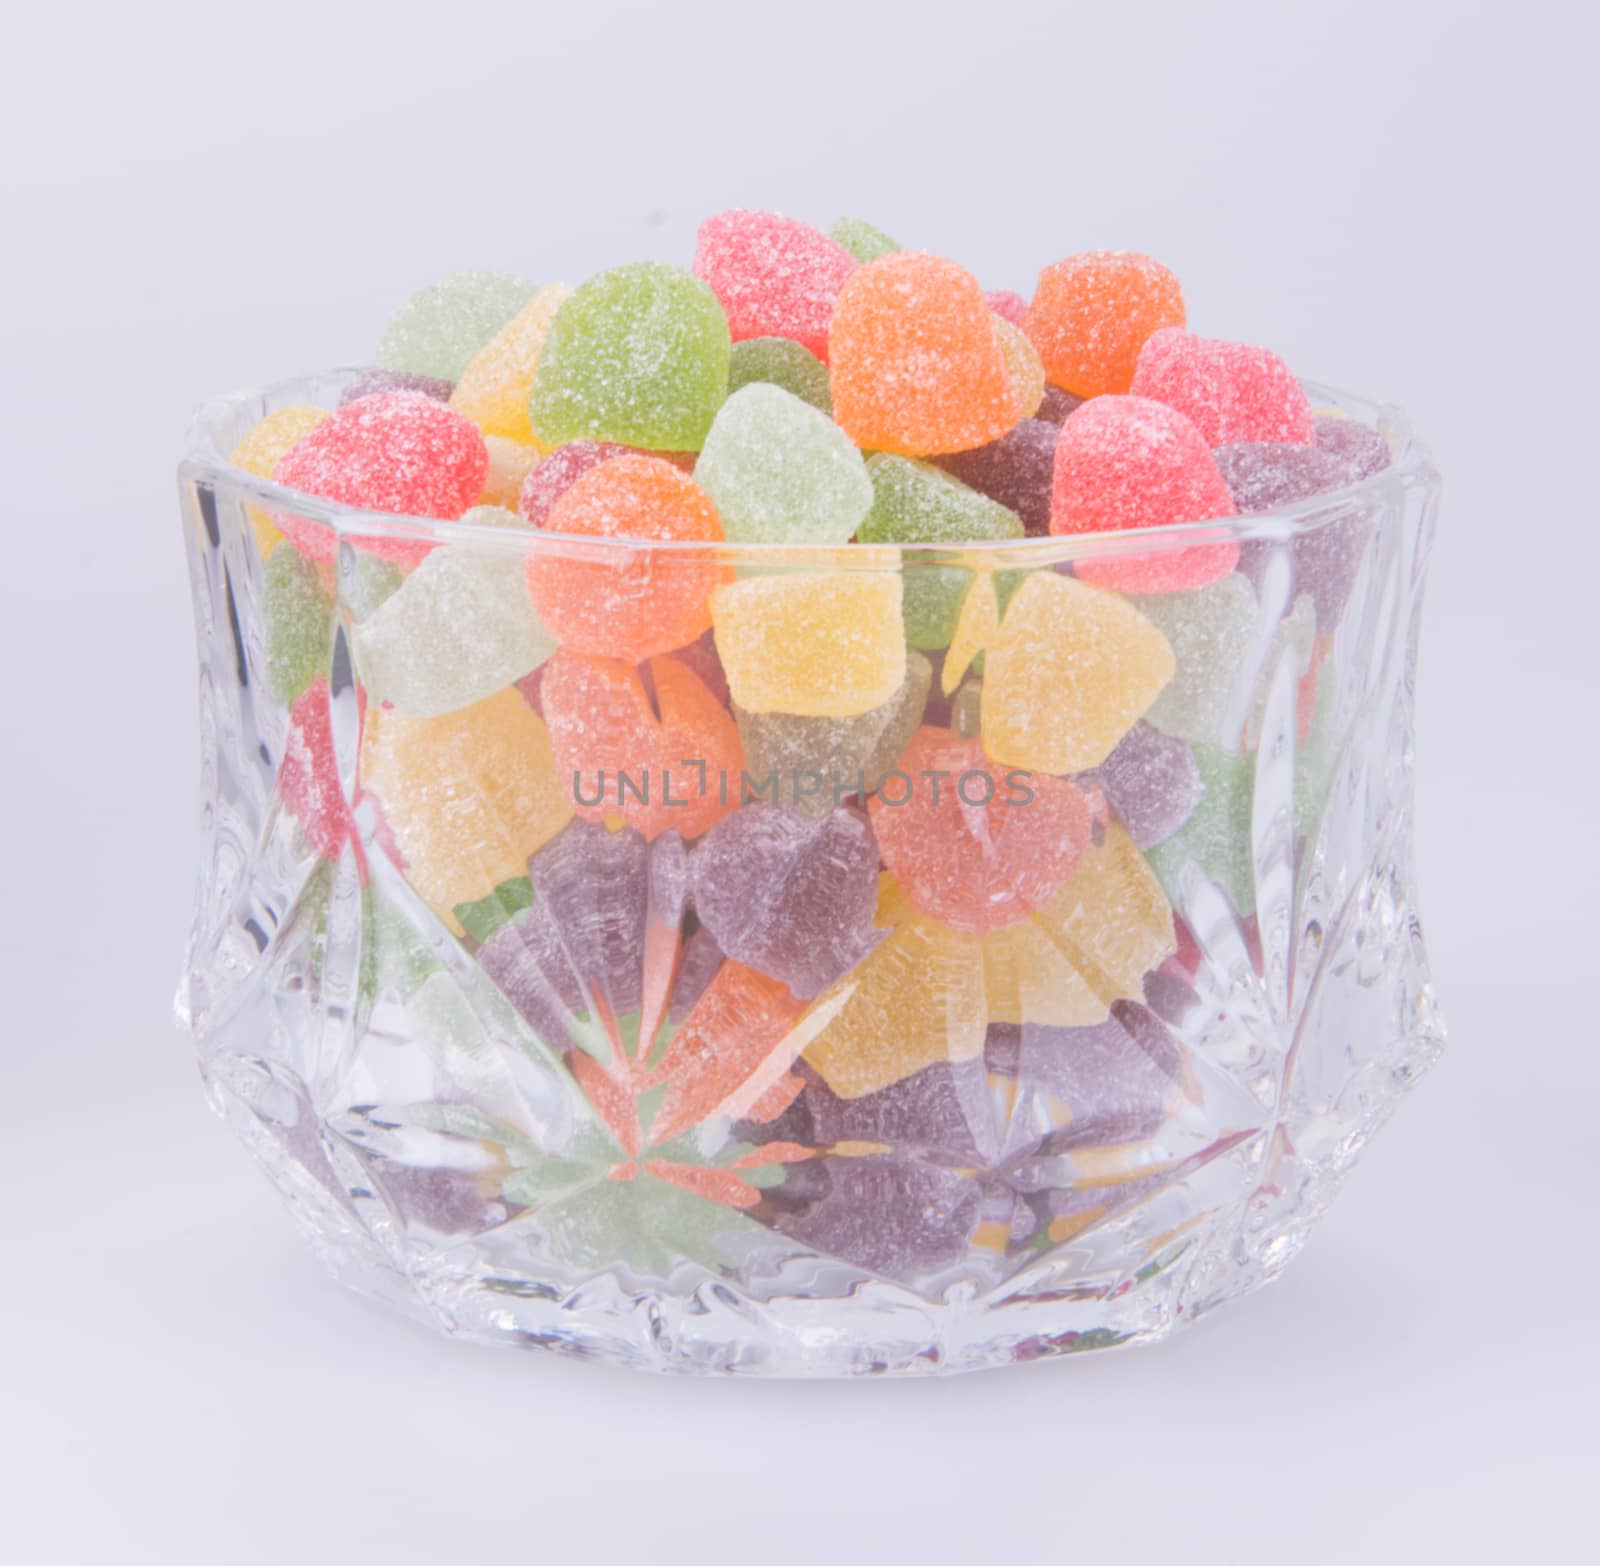 candies. jelly candies in glass bowl on a background.